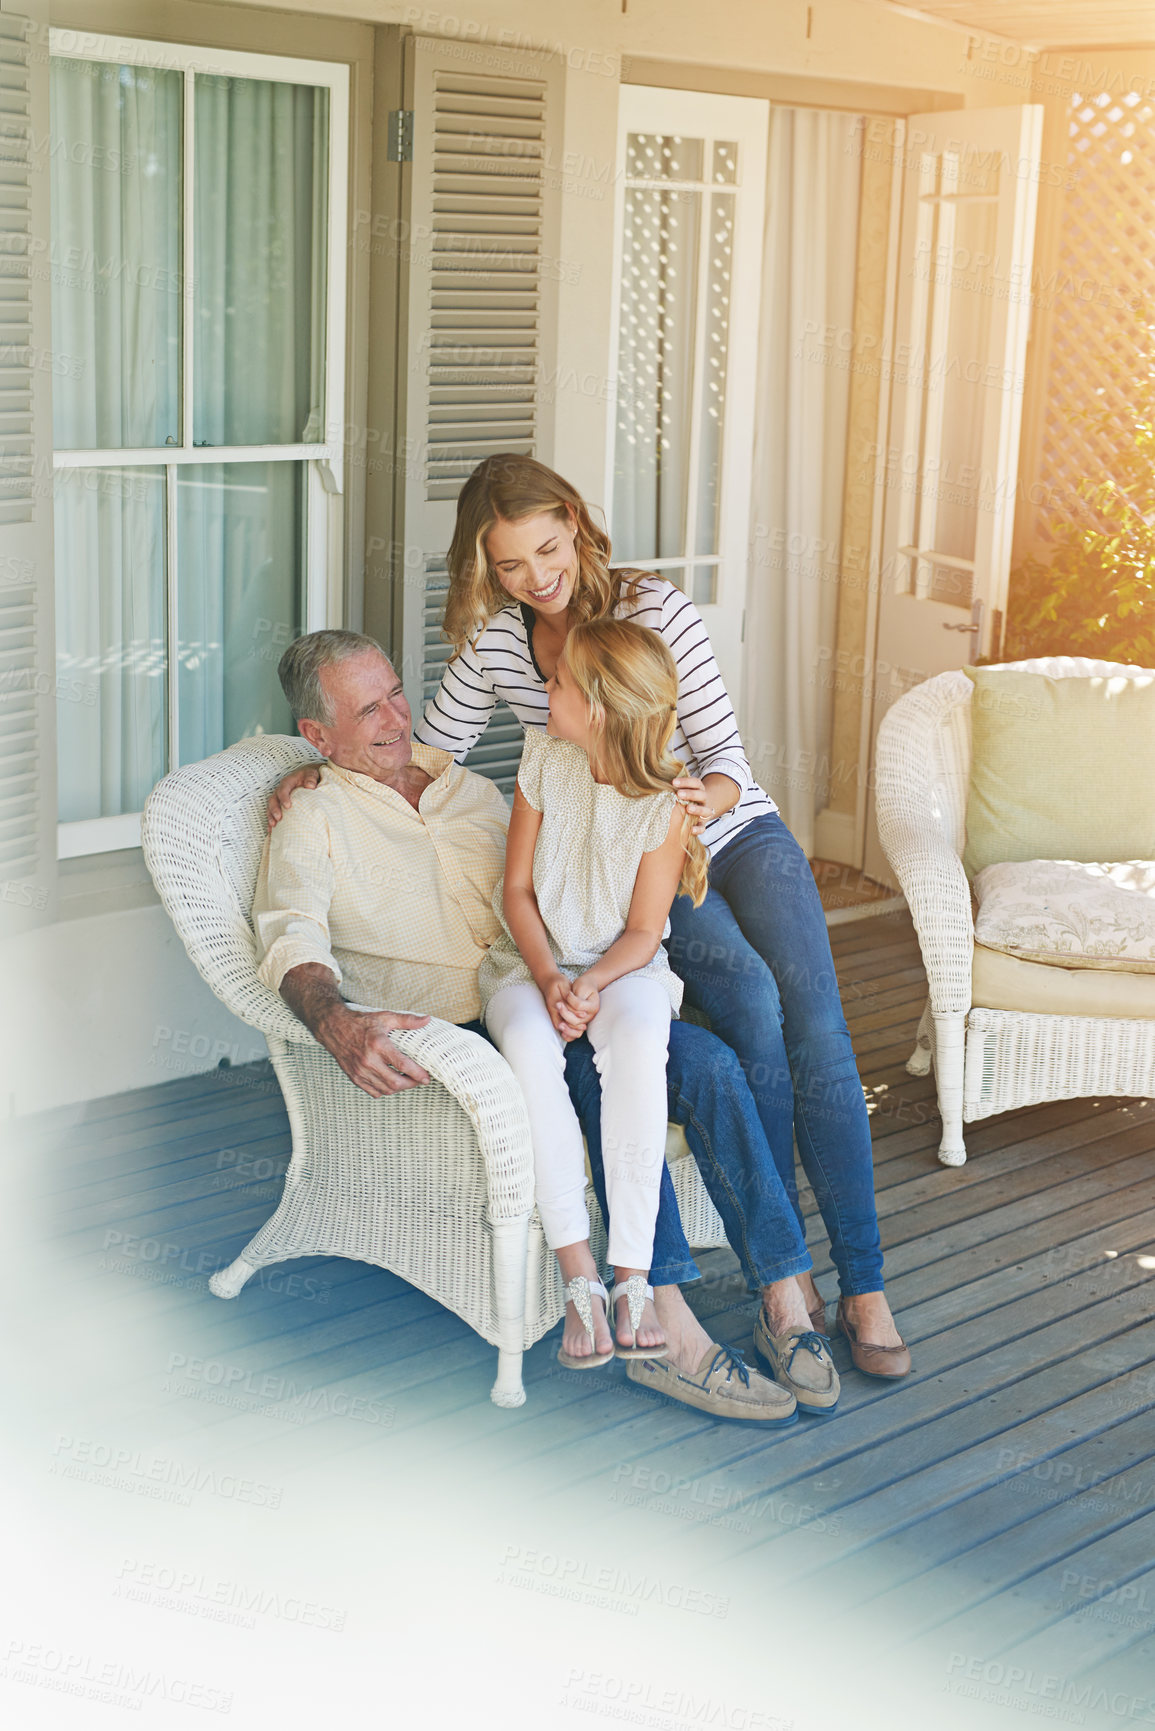 Buy stock photo Full length shot of a young girl sitting outside with her mother and grandfather